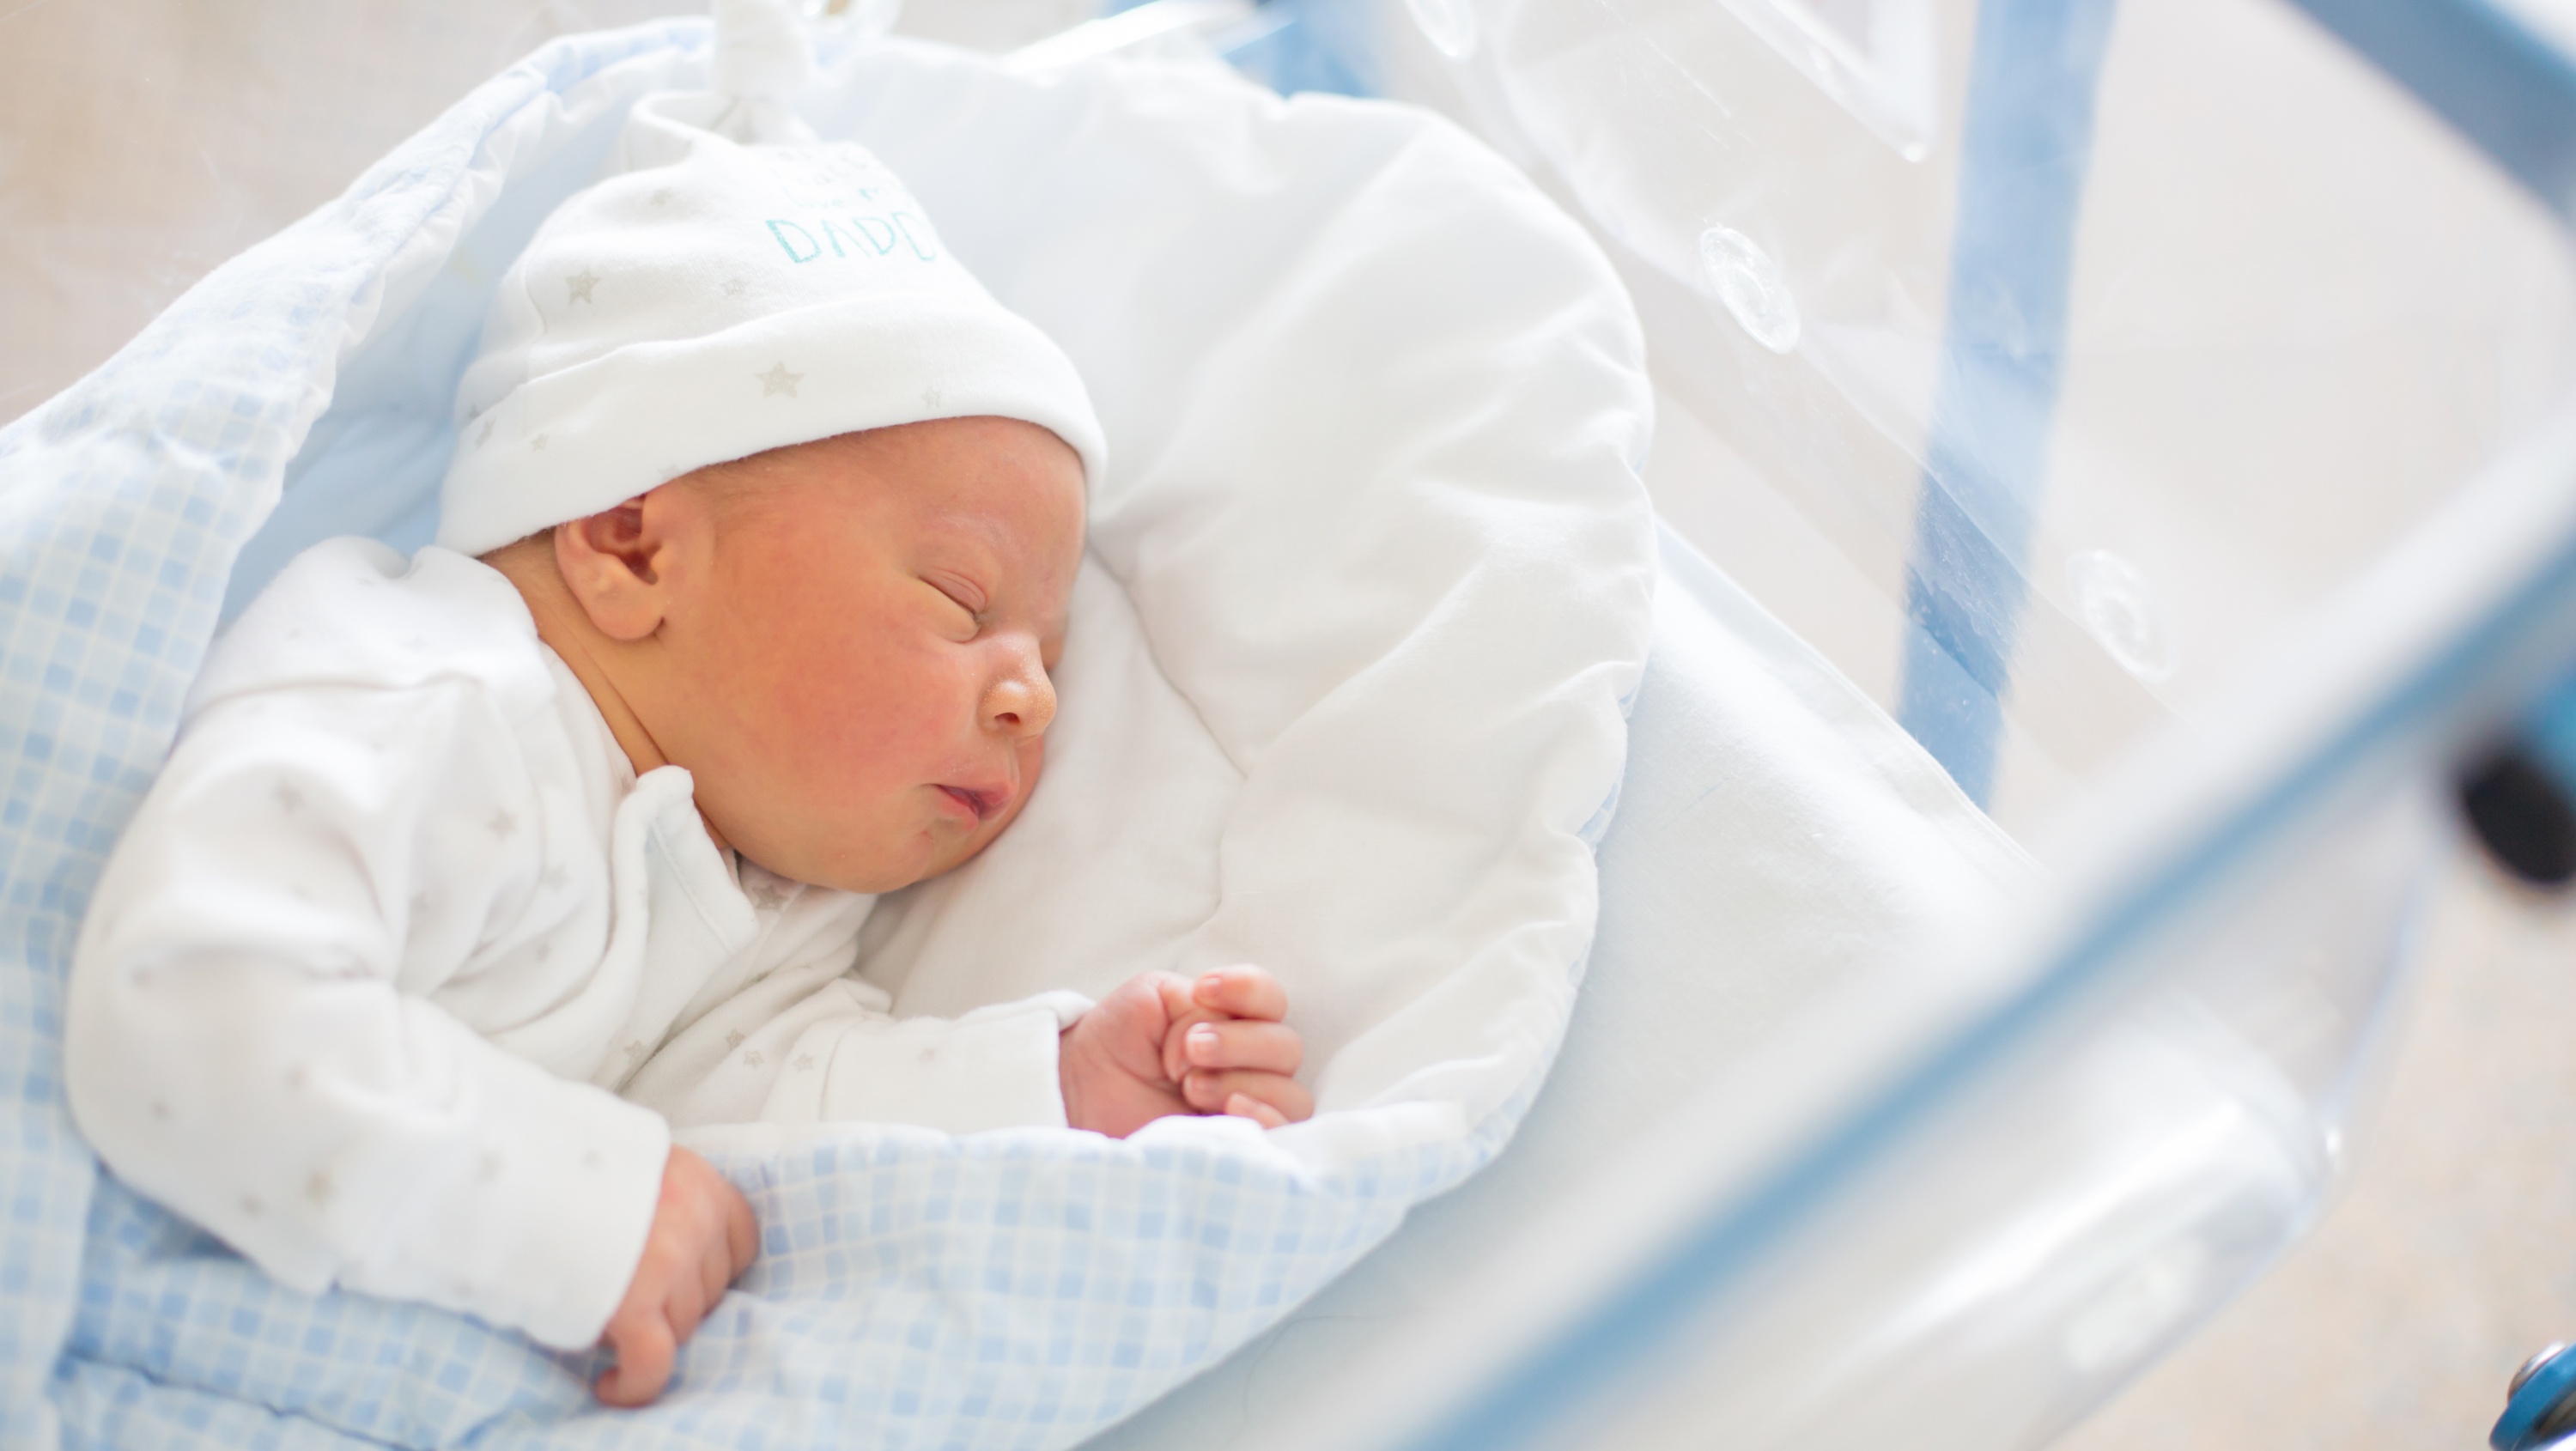 Your Baby's Umbilical Cord Could Change their Life